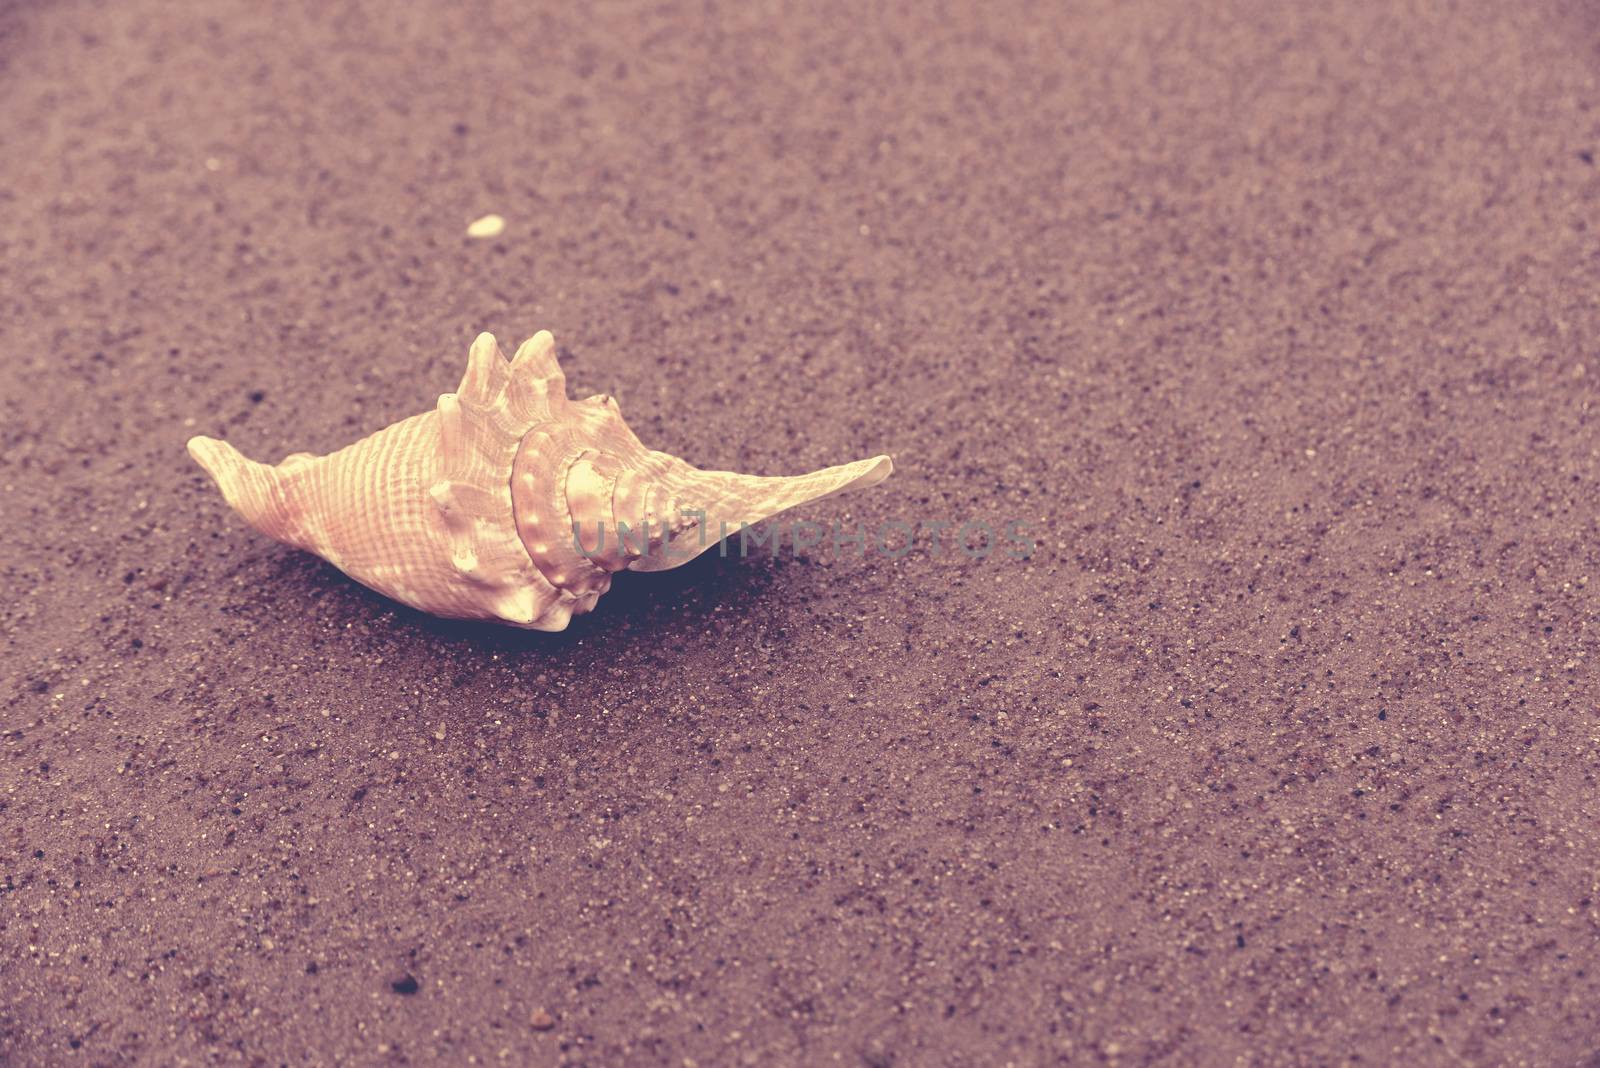 Seashell on wet sand closeup, vintage style filter effect.